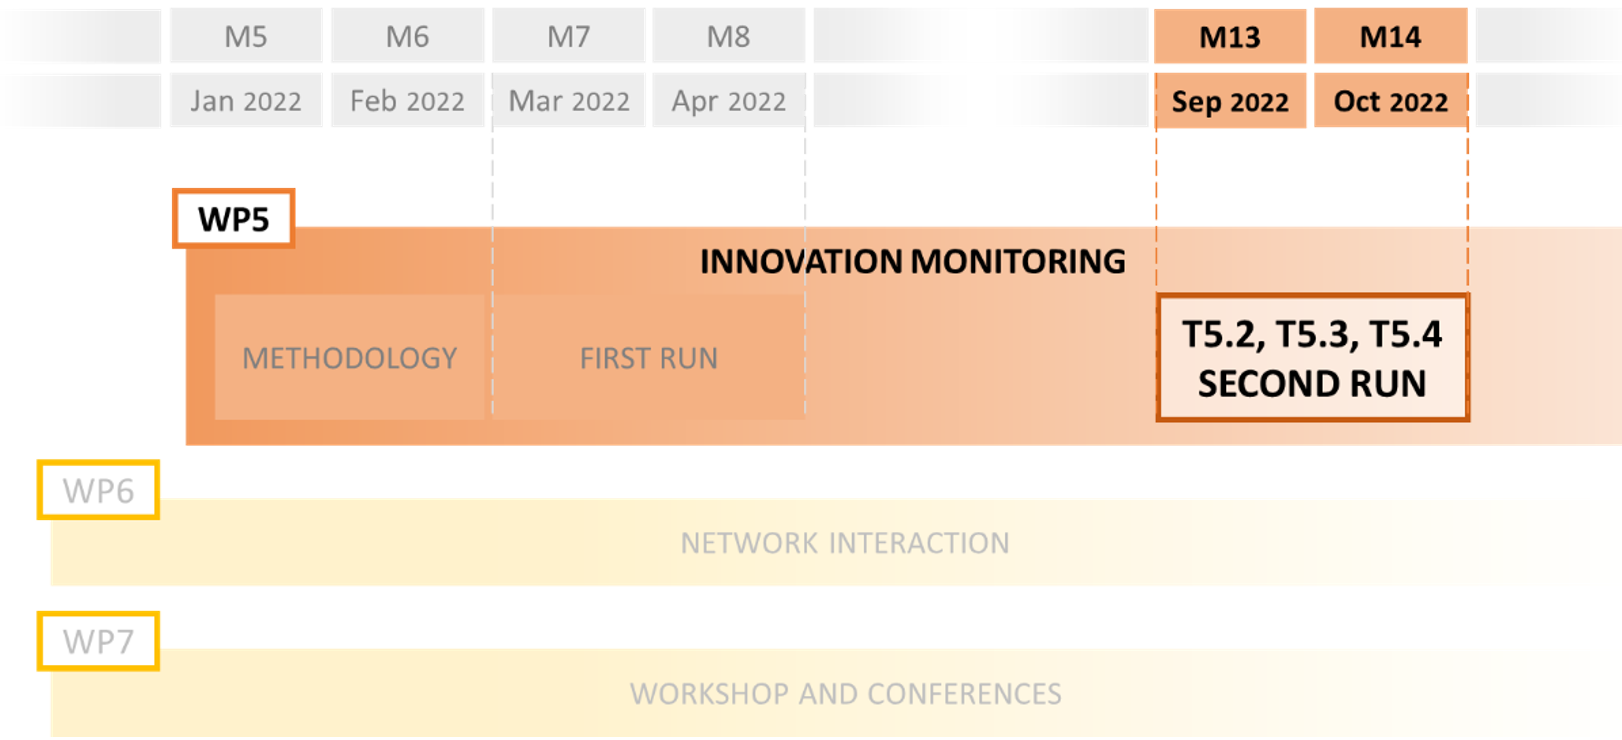 Timeline of second run of the NOTIONES Innovation Monitoring tasks